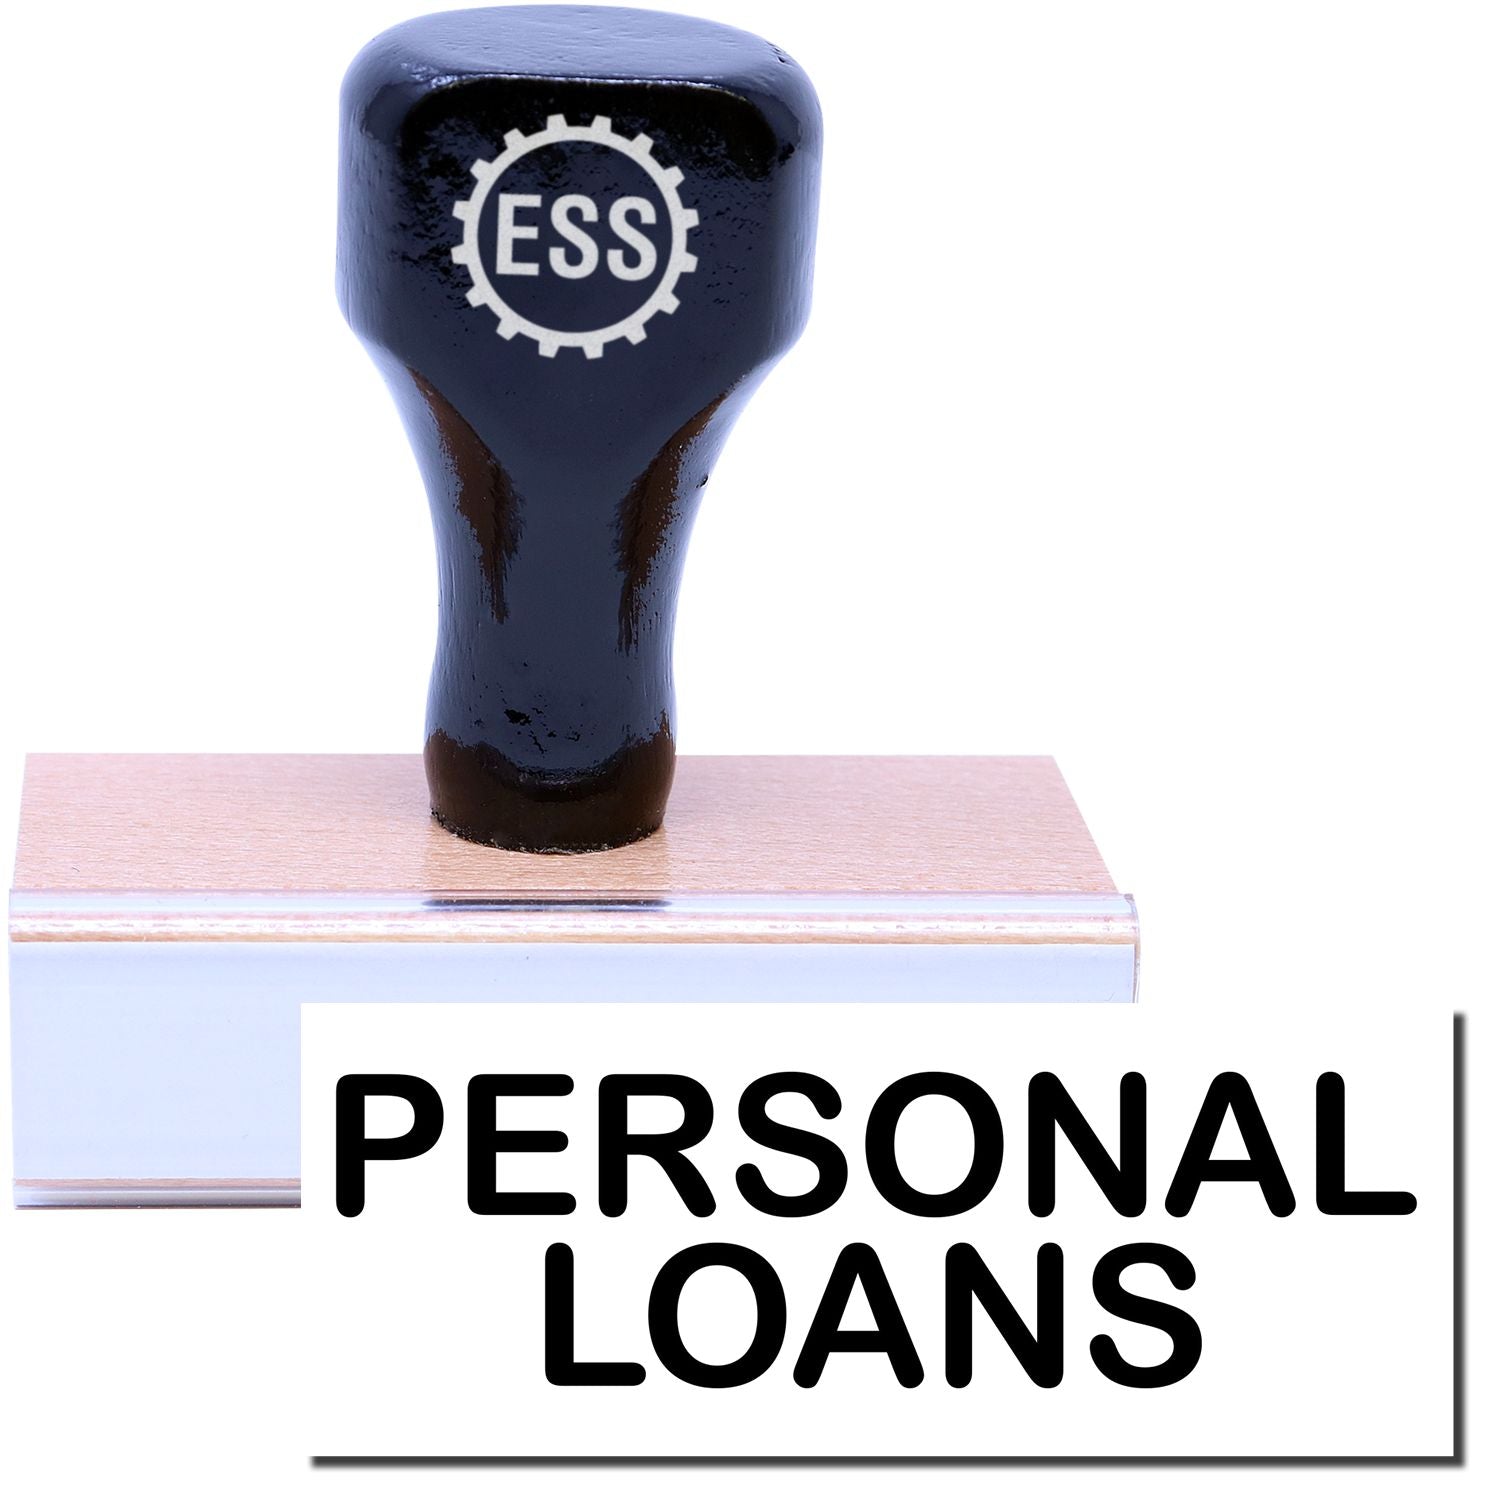 A stock office rubber stamp with a stamped image showing how the text "PERSONAL LOANS" is displayed after stamping.